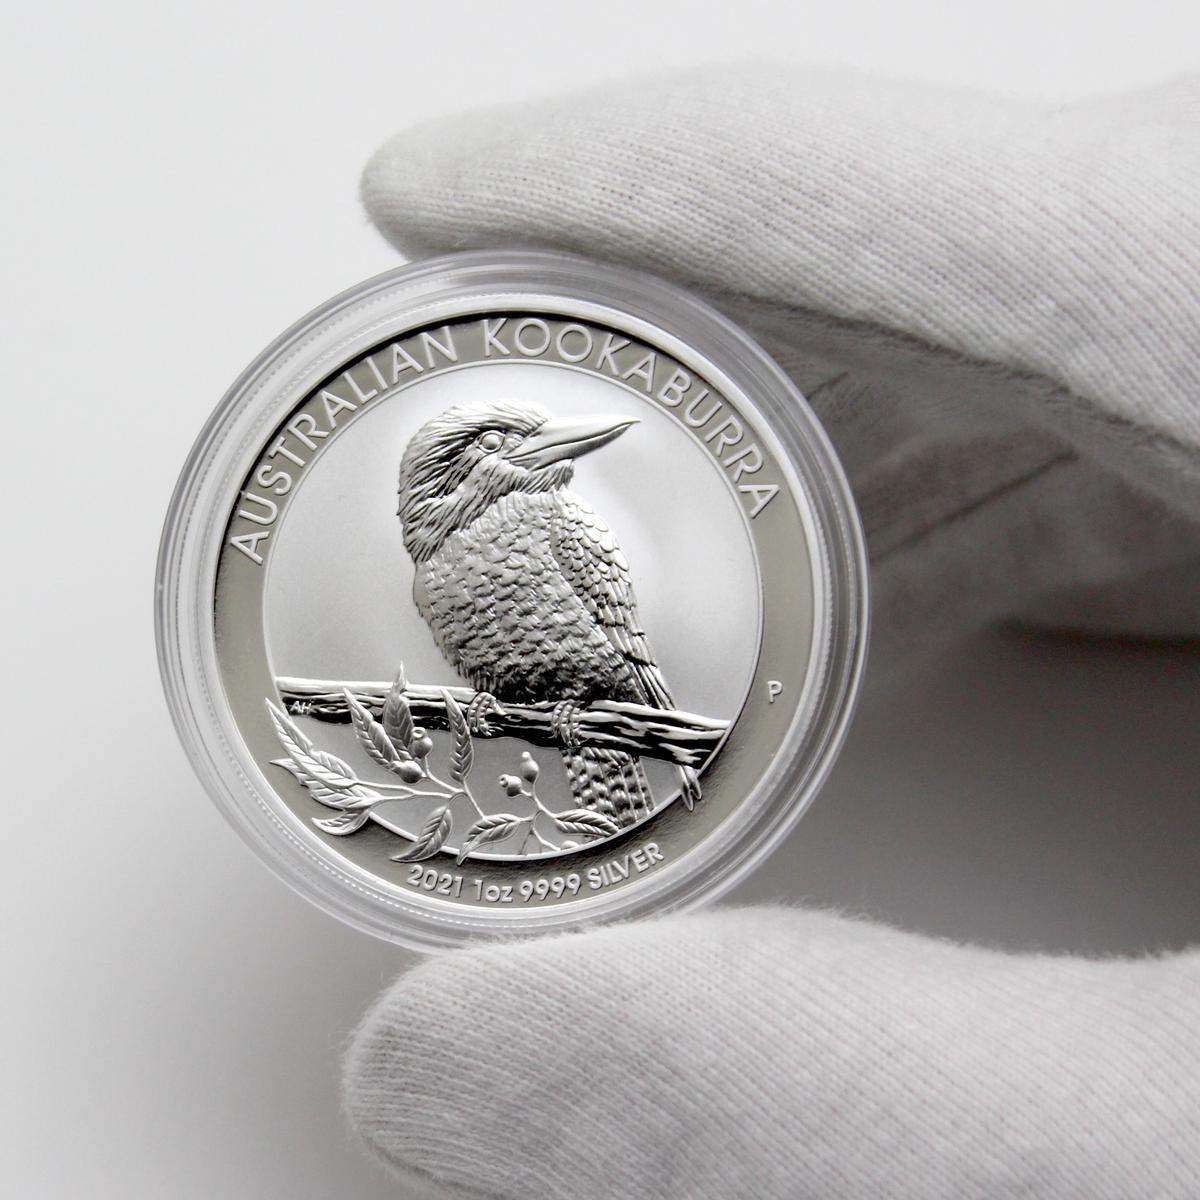 Some coins are valued based on the materials used, such as silver, as well as limited production and yearly design changes. (Zlaťáky.cz/Unsplash)